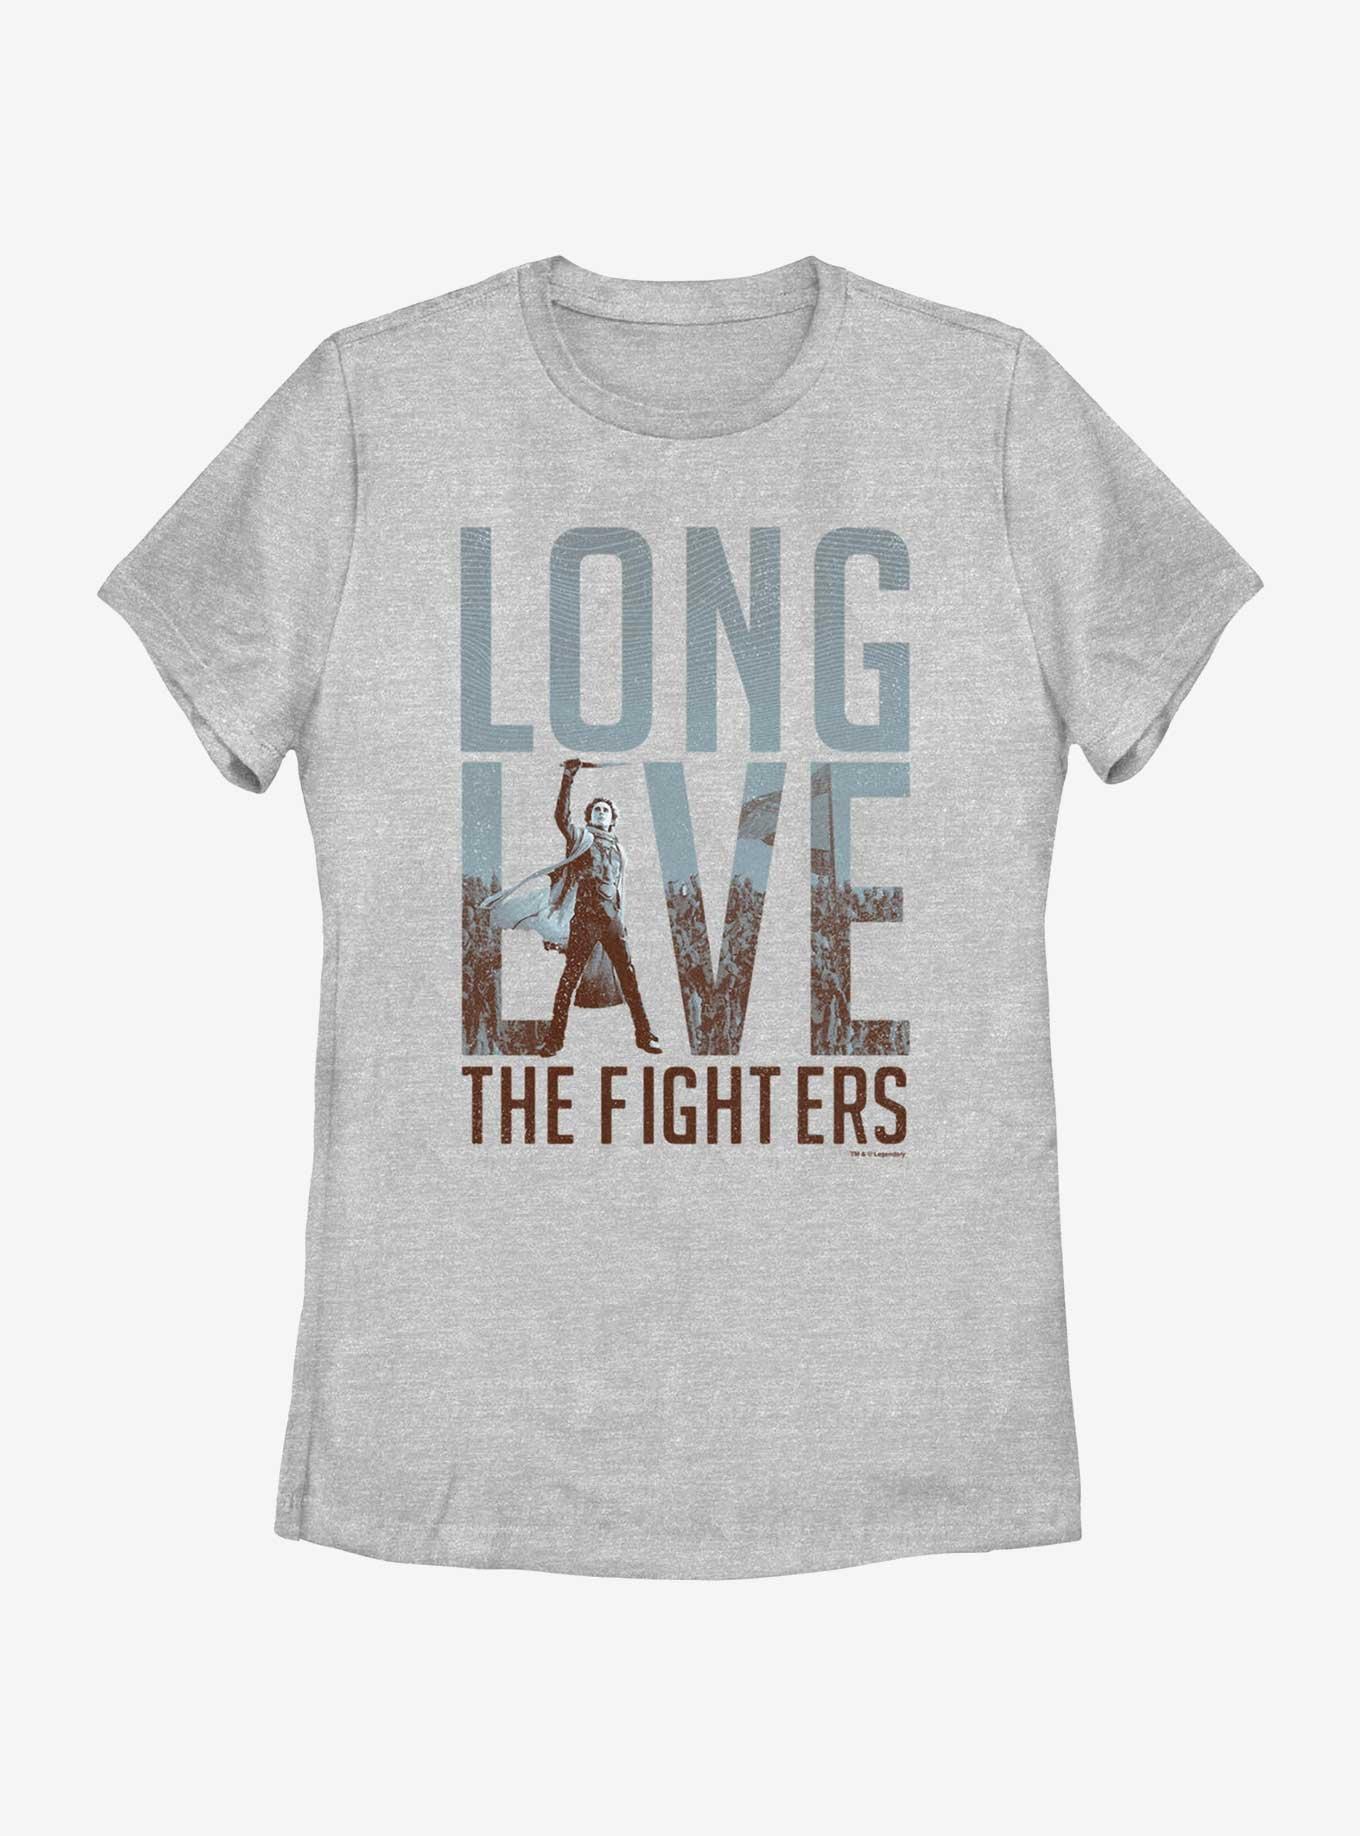 Dune Long Live The Fighters Paul Womens T-Shirt, , hi-res